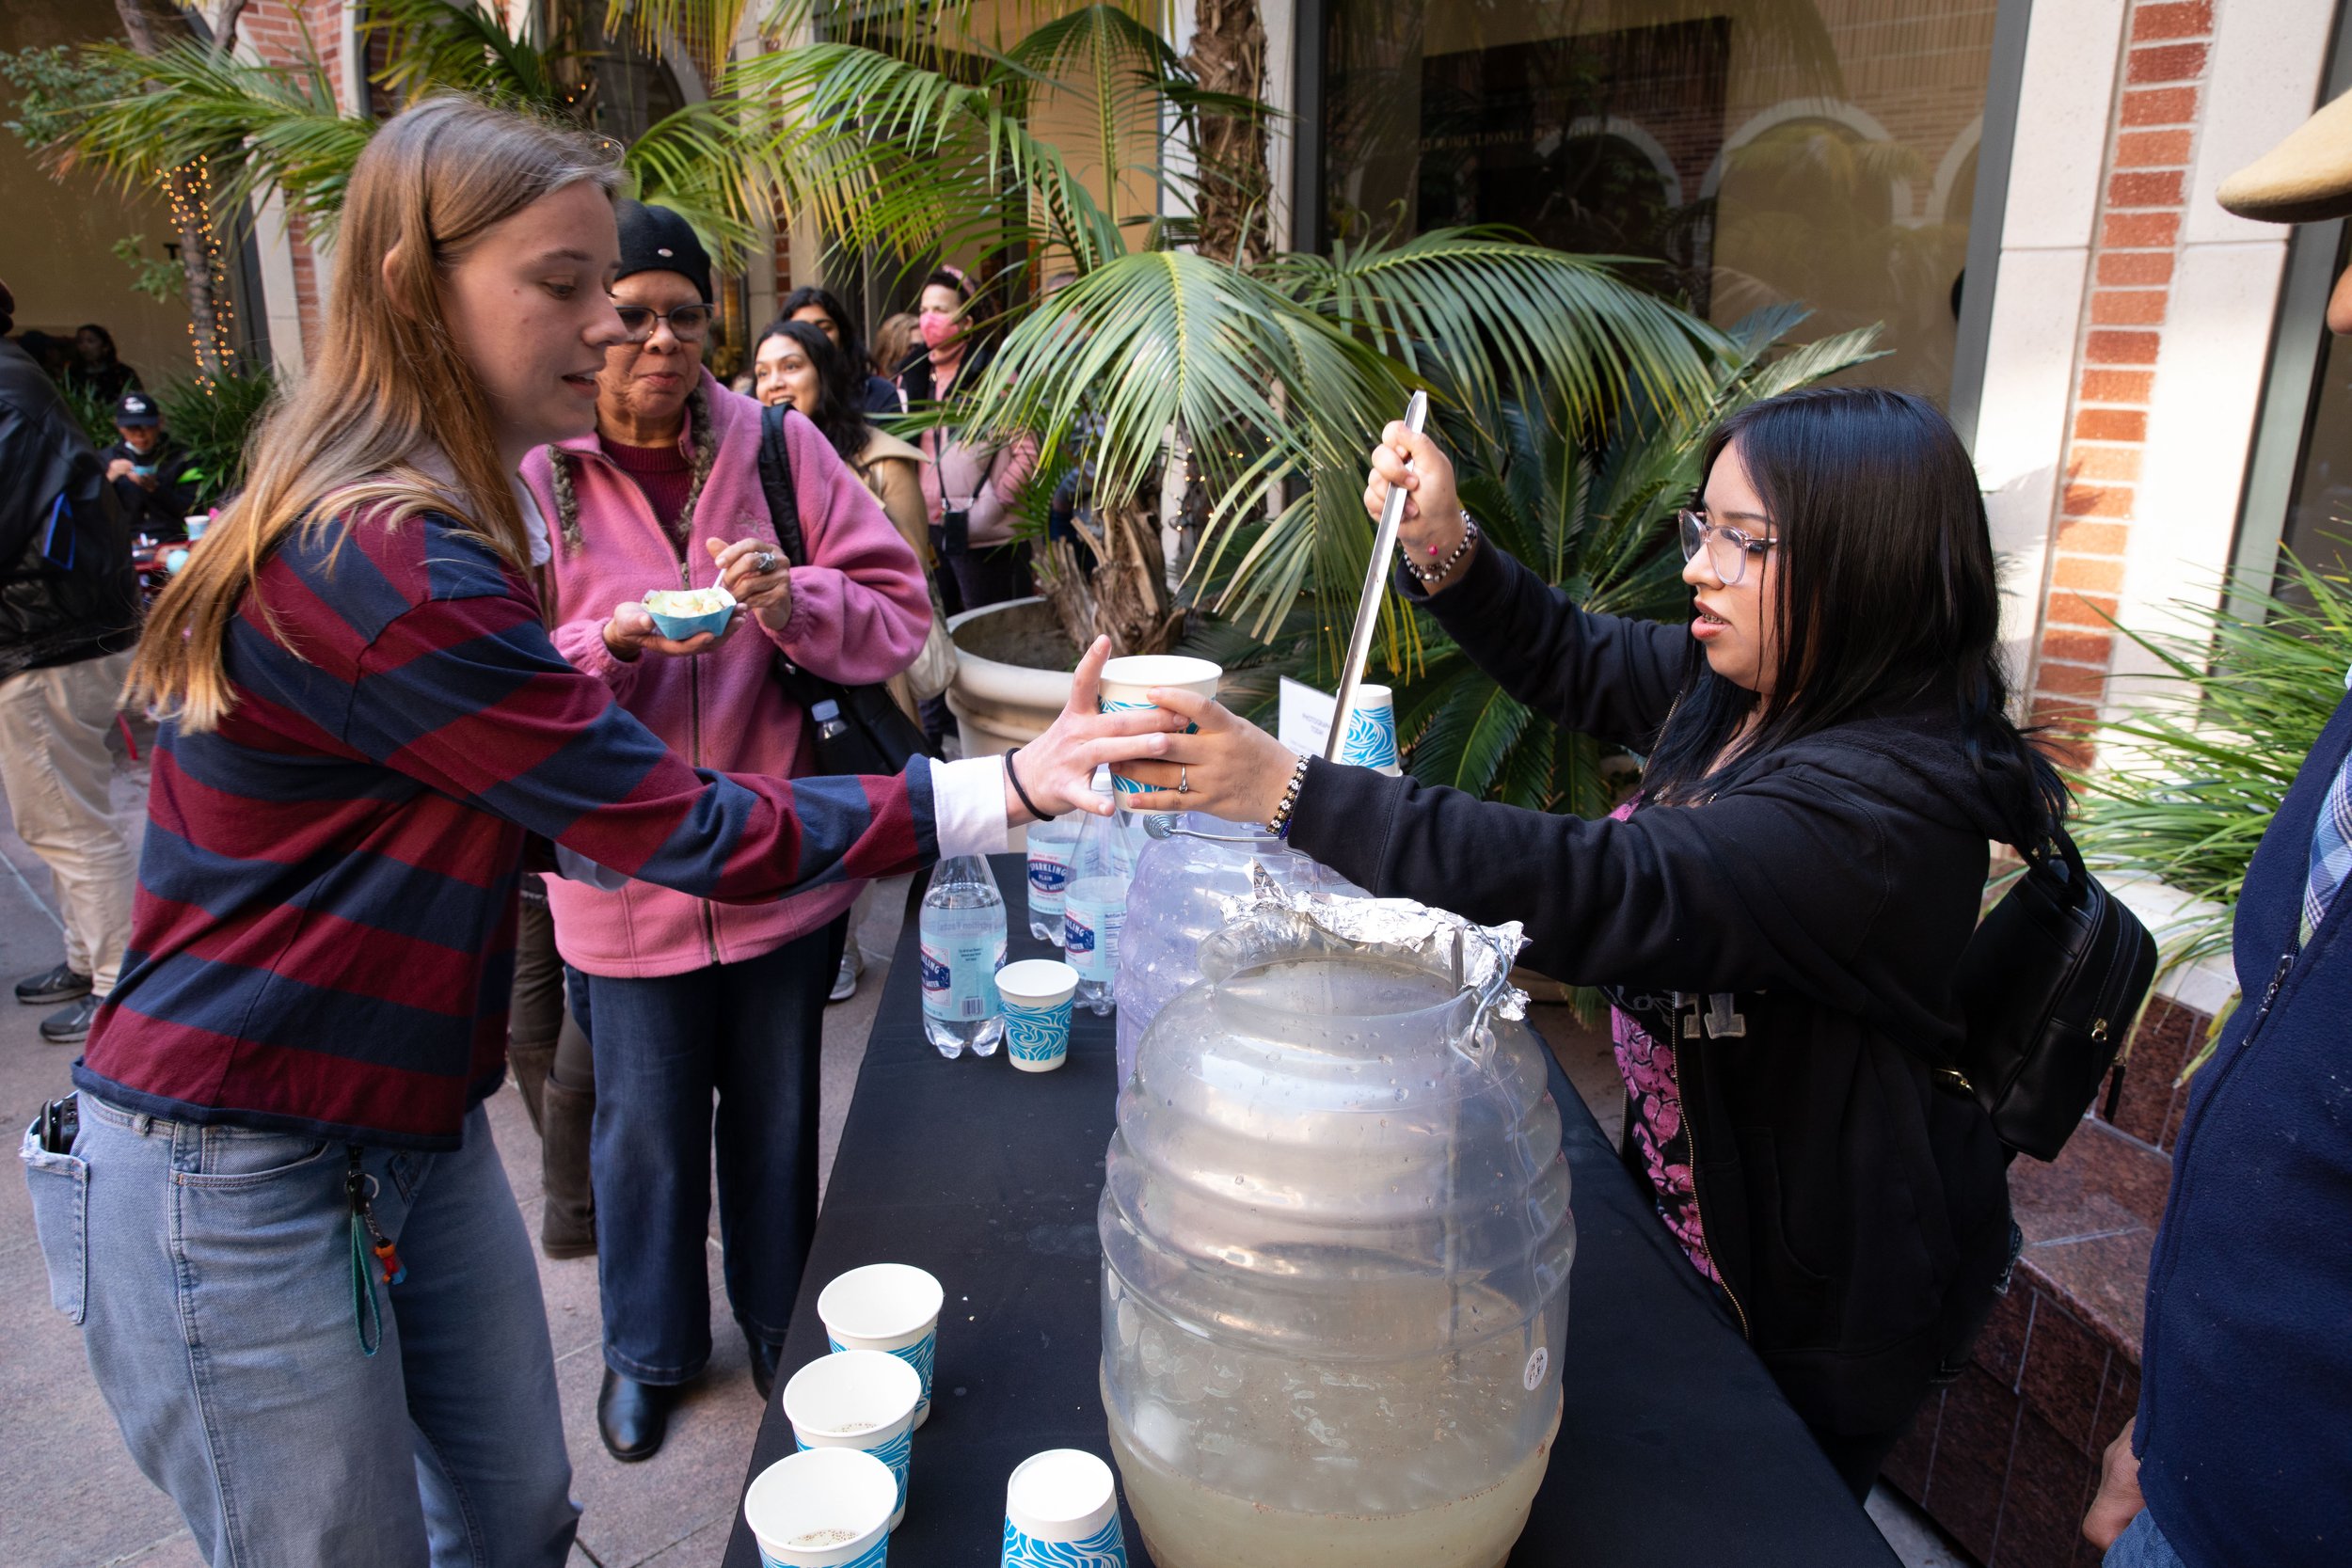  Deliana Baza grand daughter of abuelita Yolanda Baza featured in the movie fills cups with homemade horchata for the attendees. Reception after the screening of the documentary “Abuelita’s Kitchen: Mexican Food Stories” inside the Fowler Museum at U